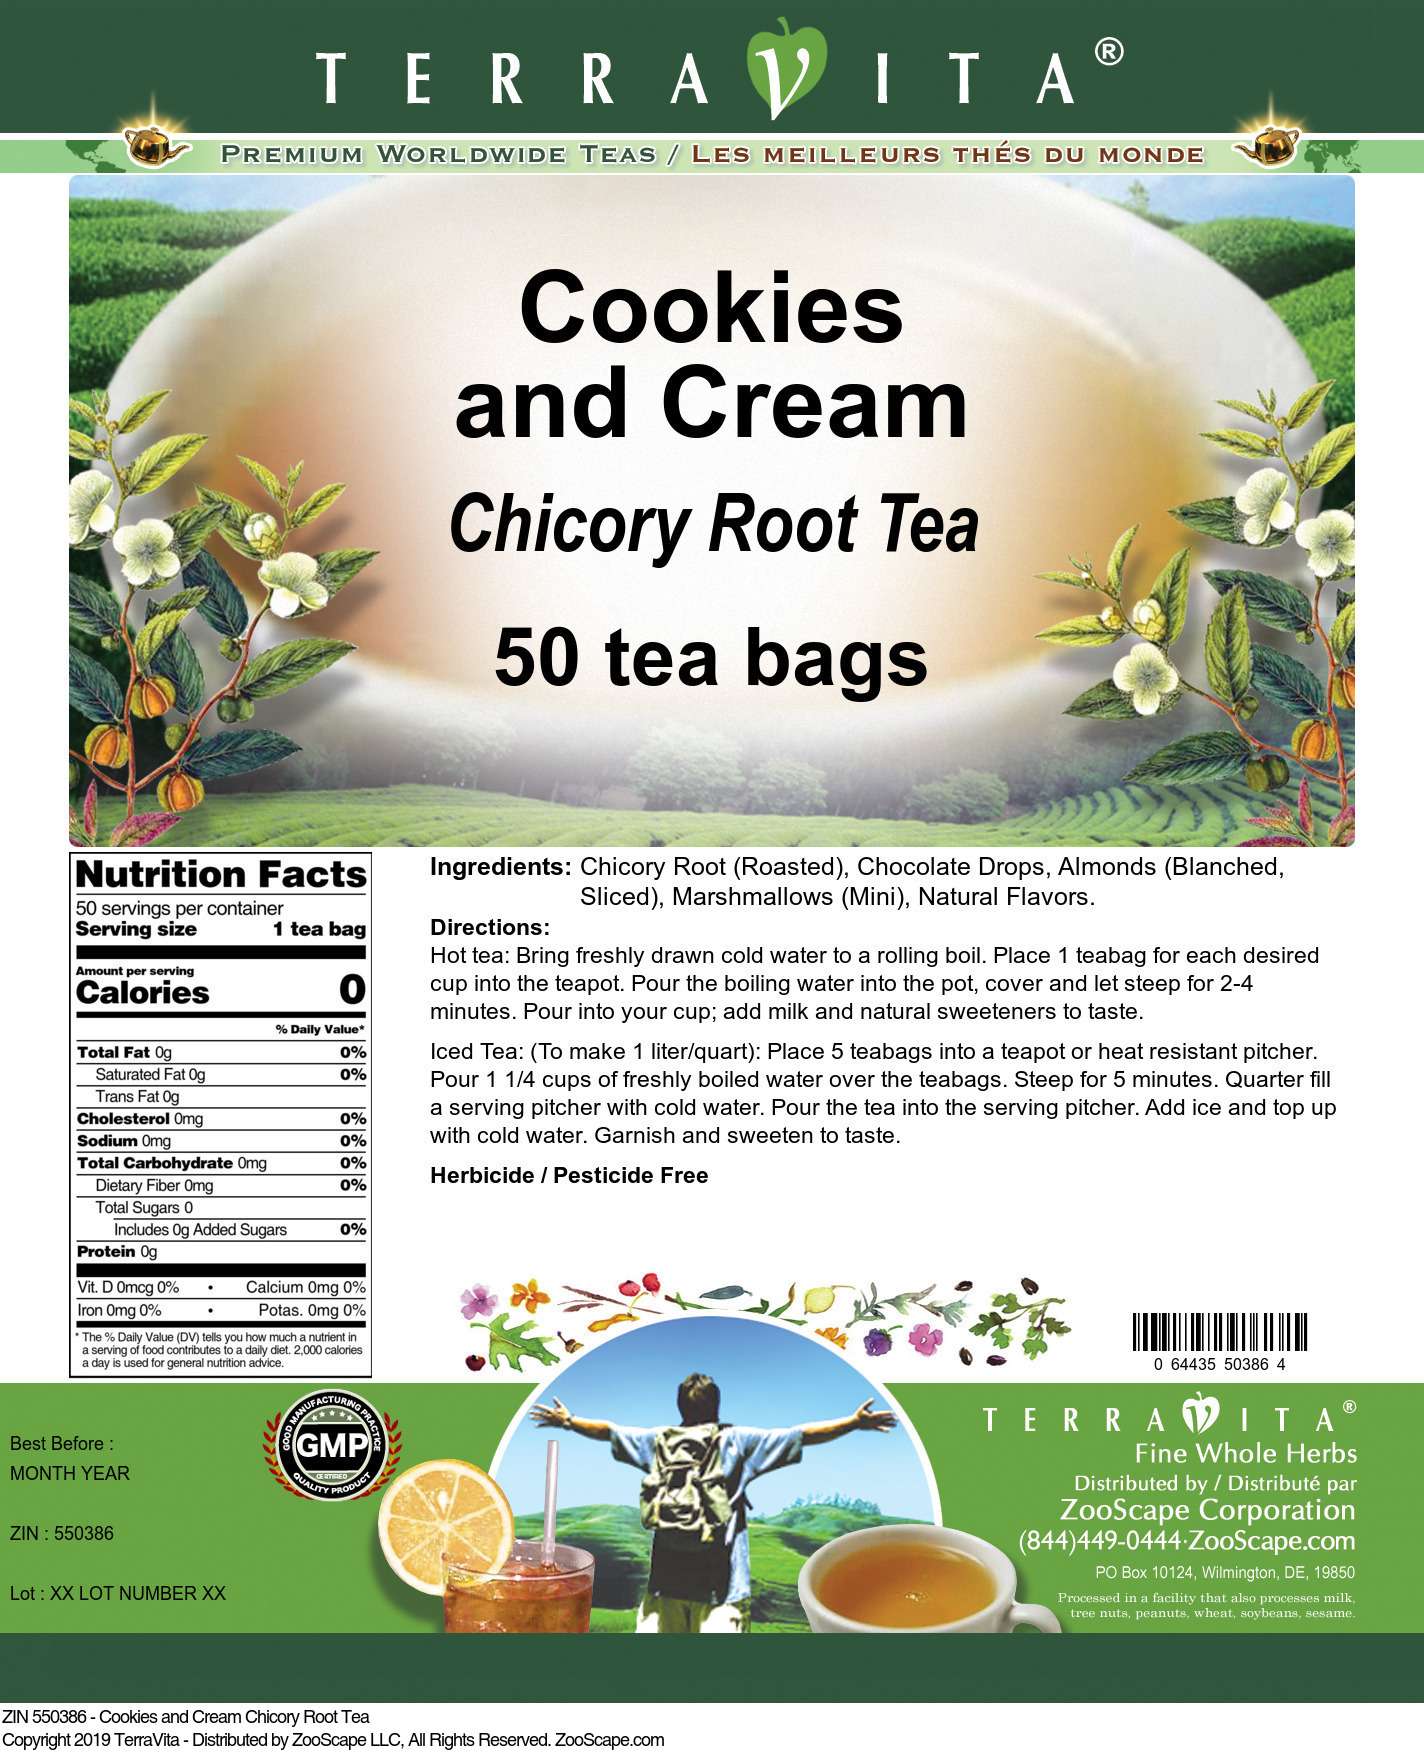 Cookies and Cream Chicory Root Tea - Label